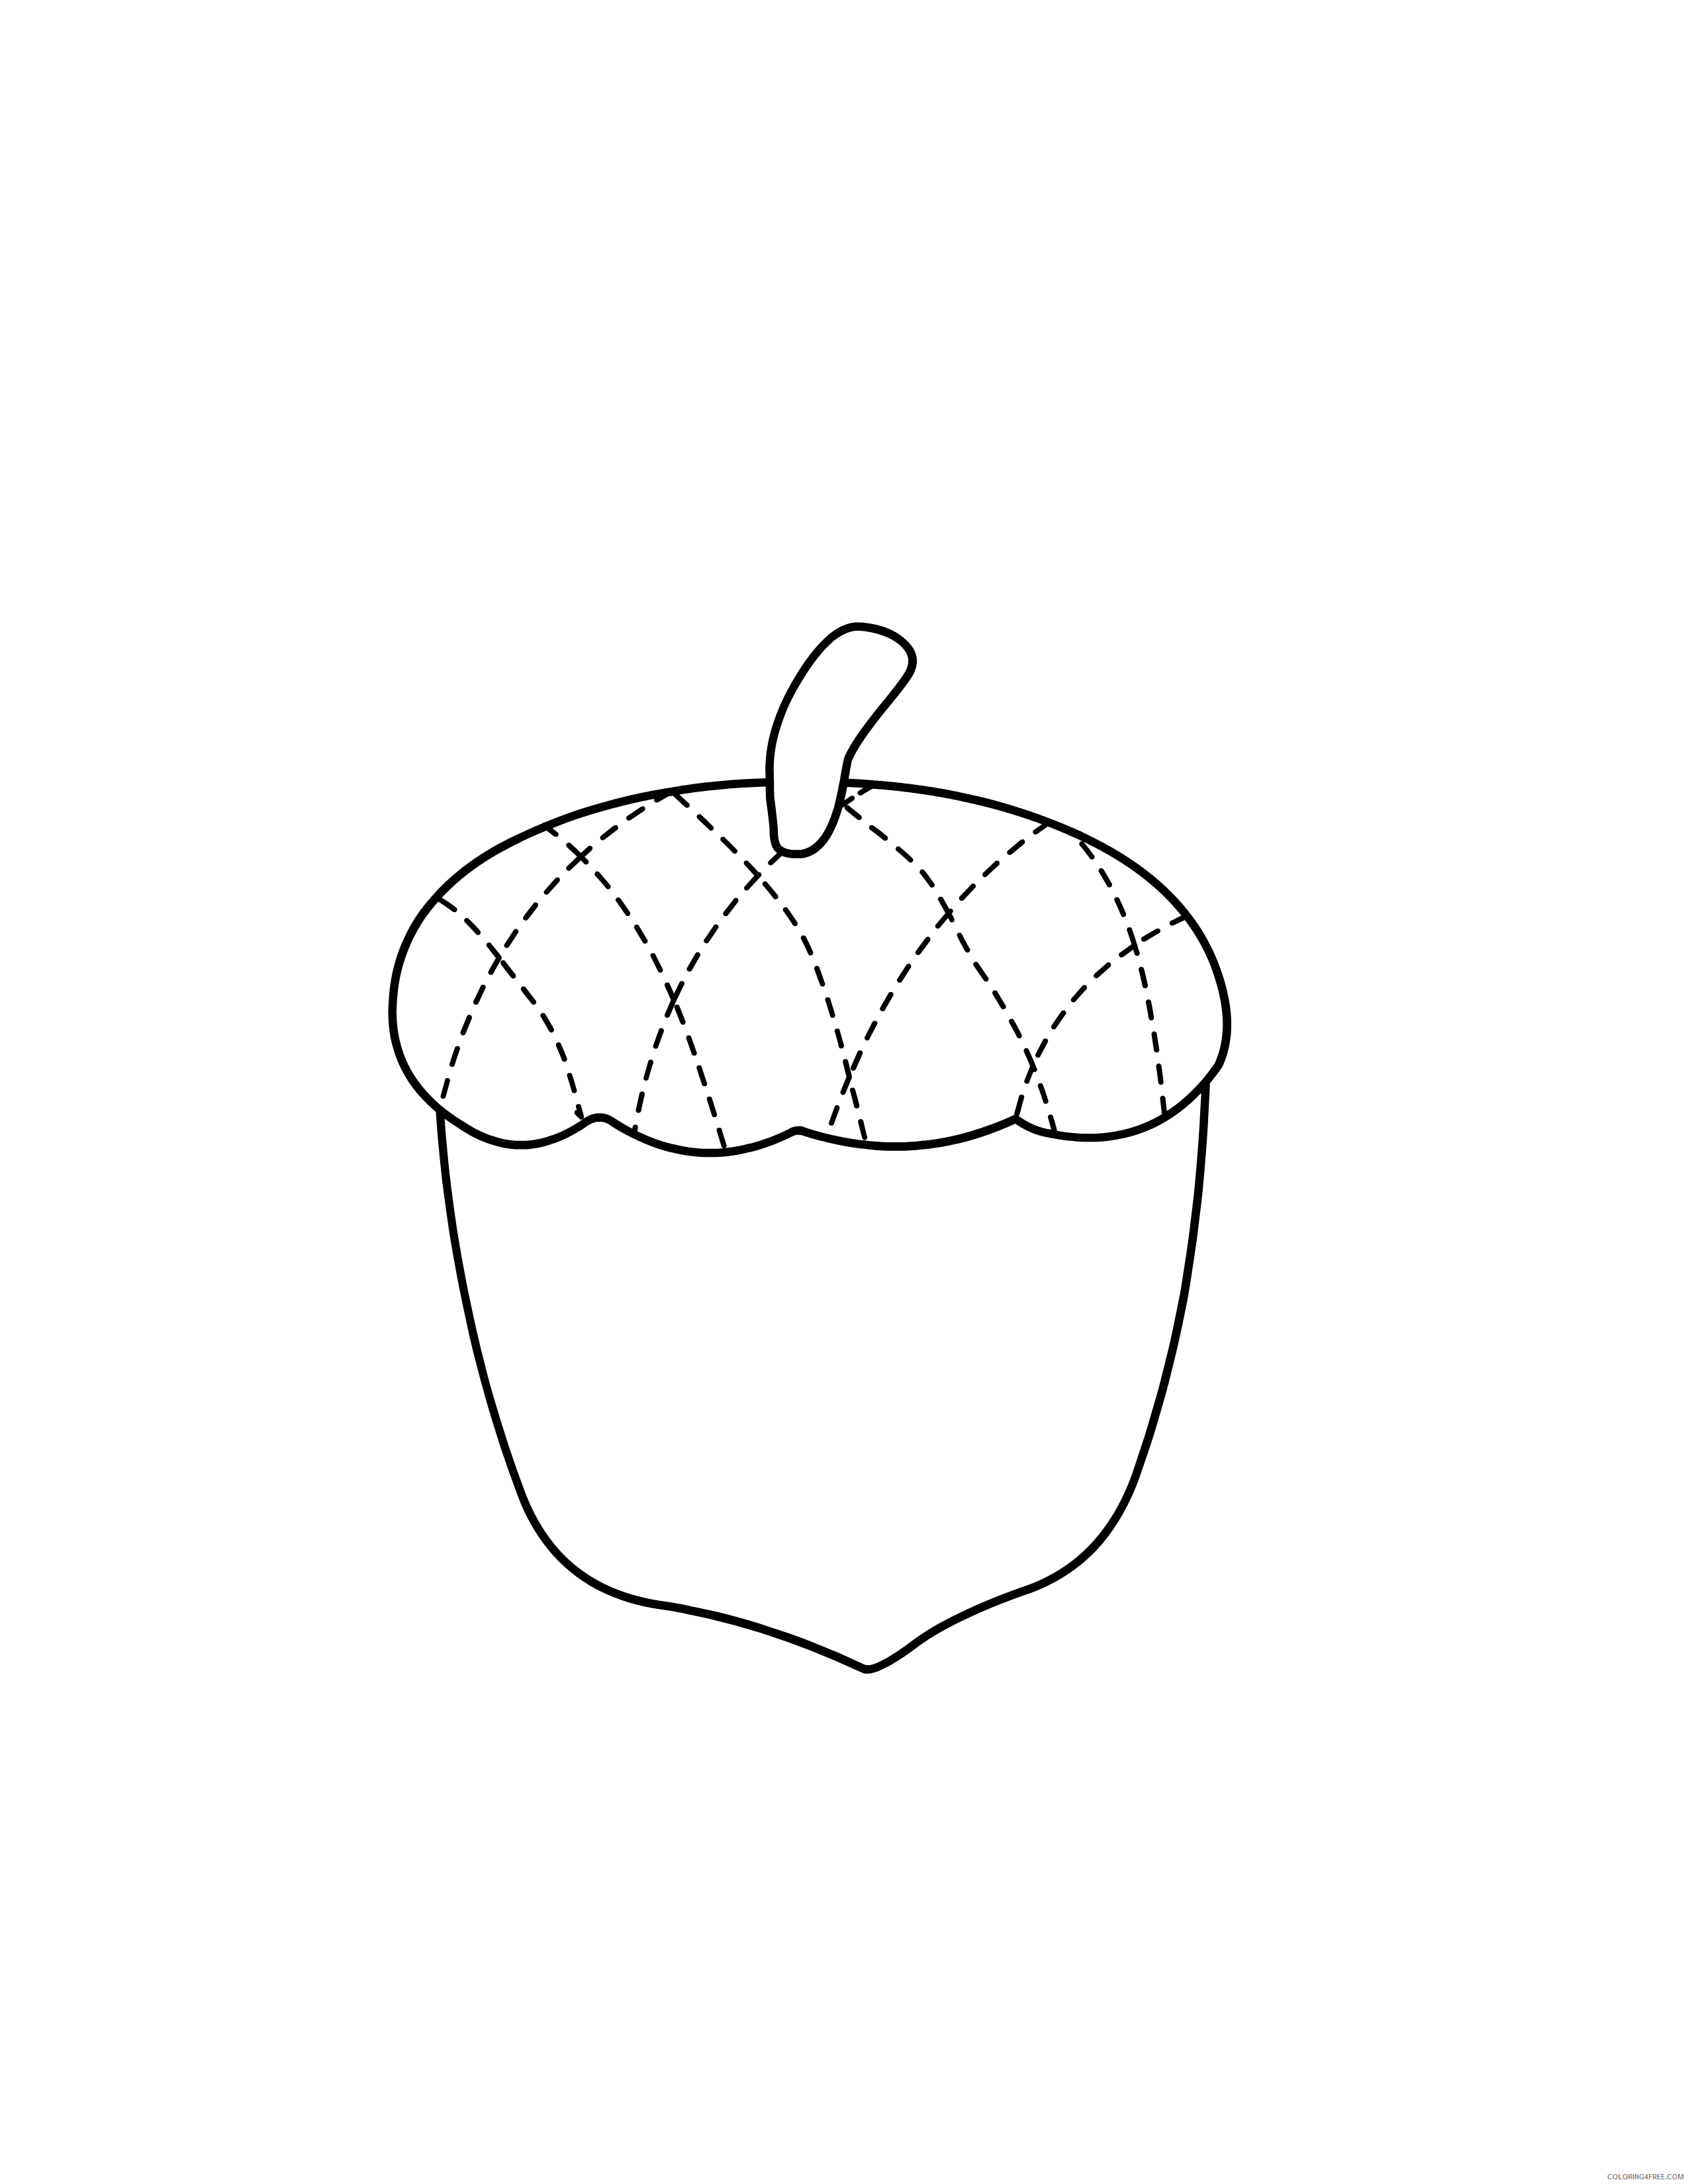 Acorns Coloring Pages Printable Sheets 9 Pics of Acorn Template 2021 a 1478 Coloring4free